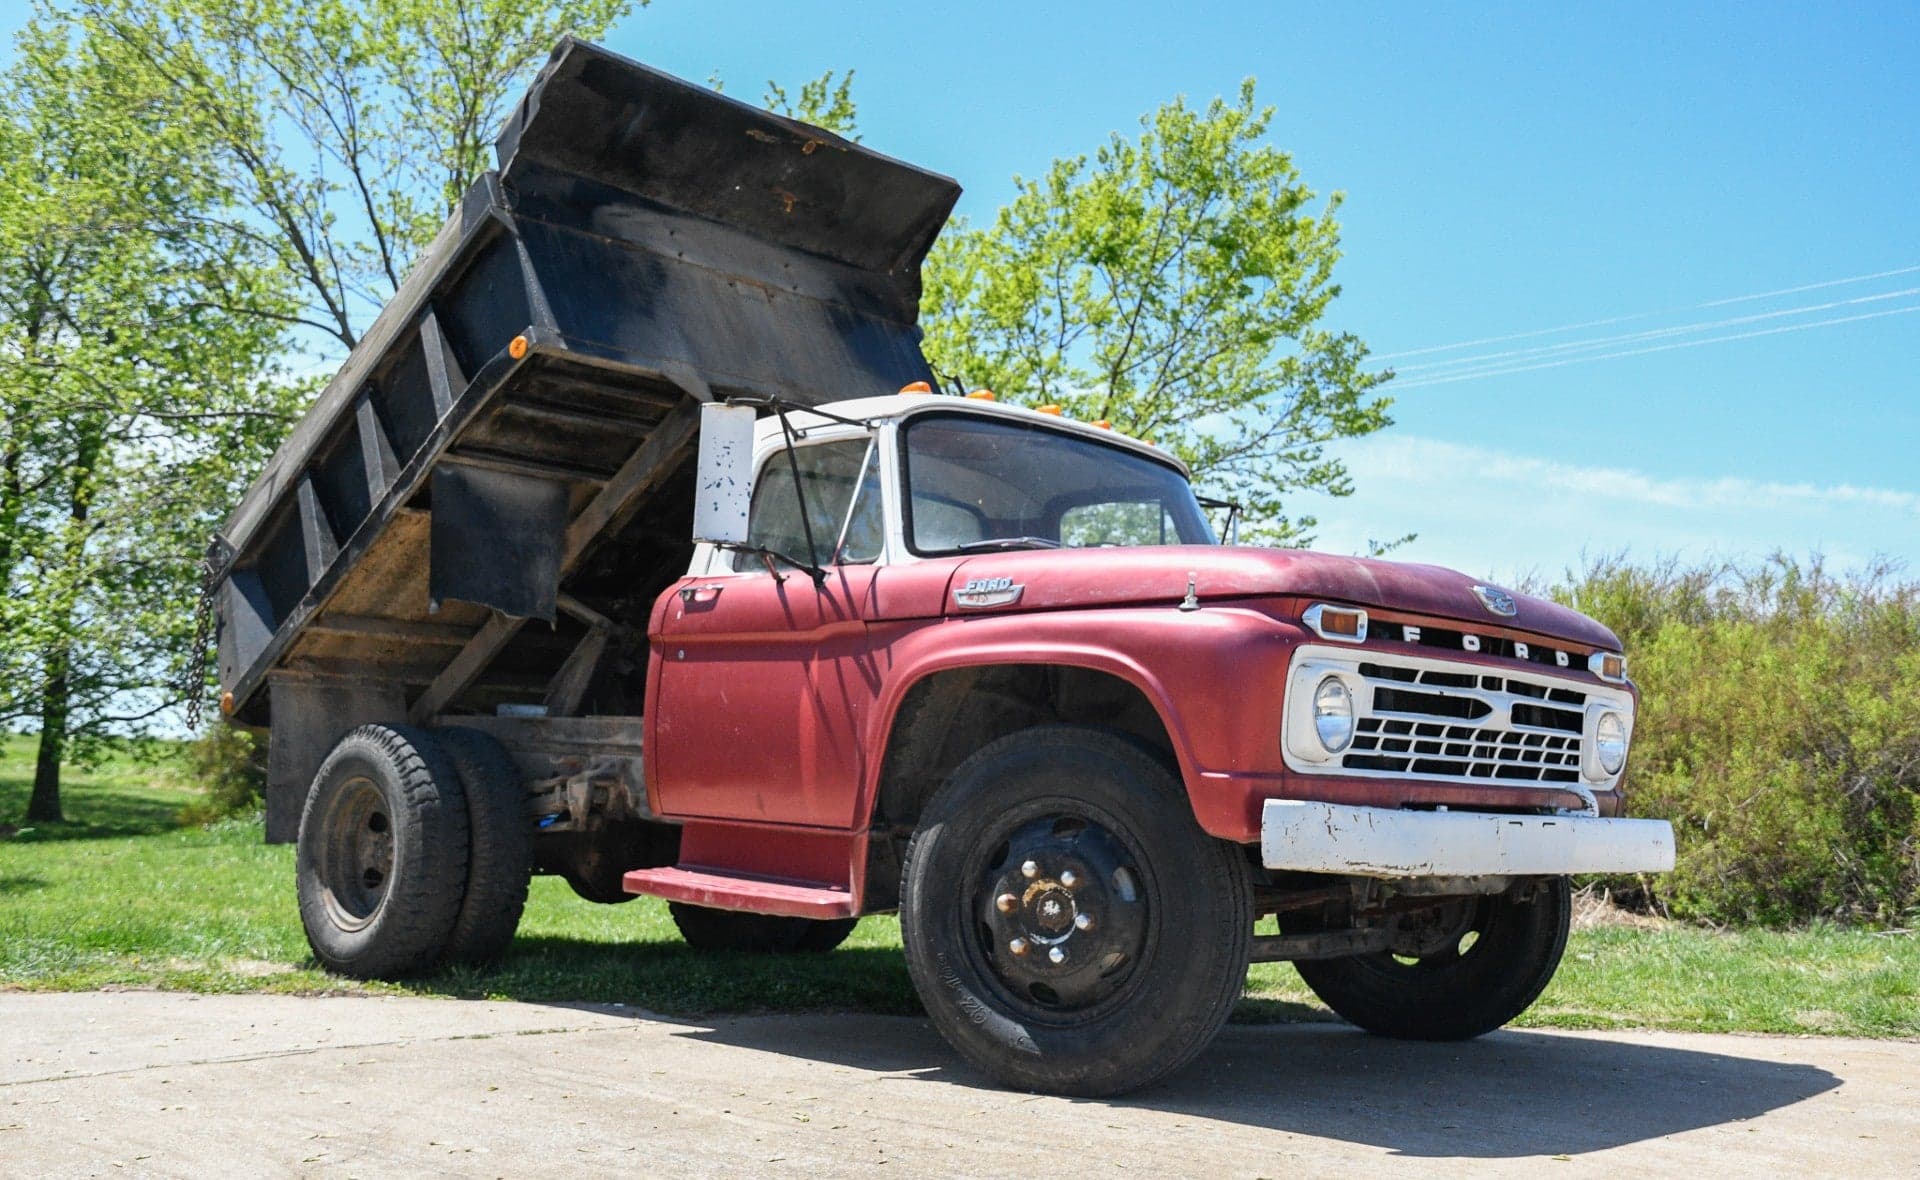 I’ve Already Been Humbled by My 55-Year-Old Ford Dump Truck